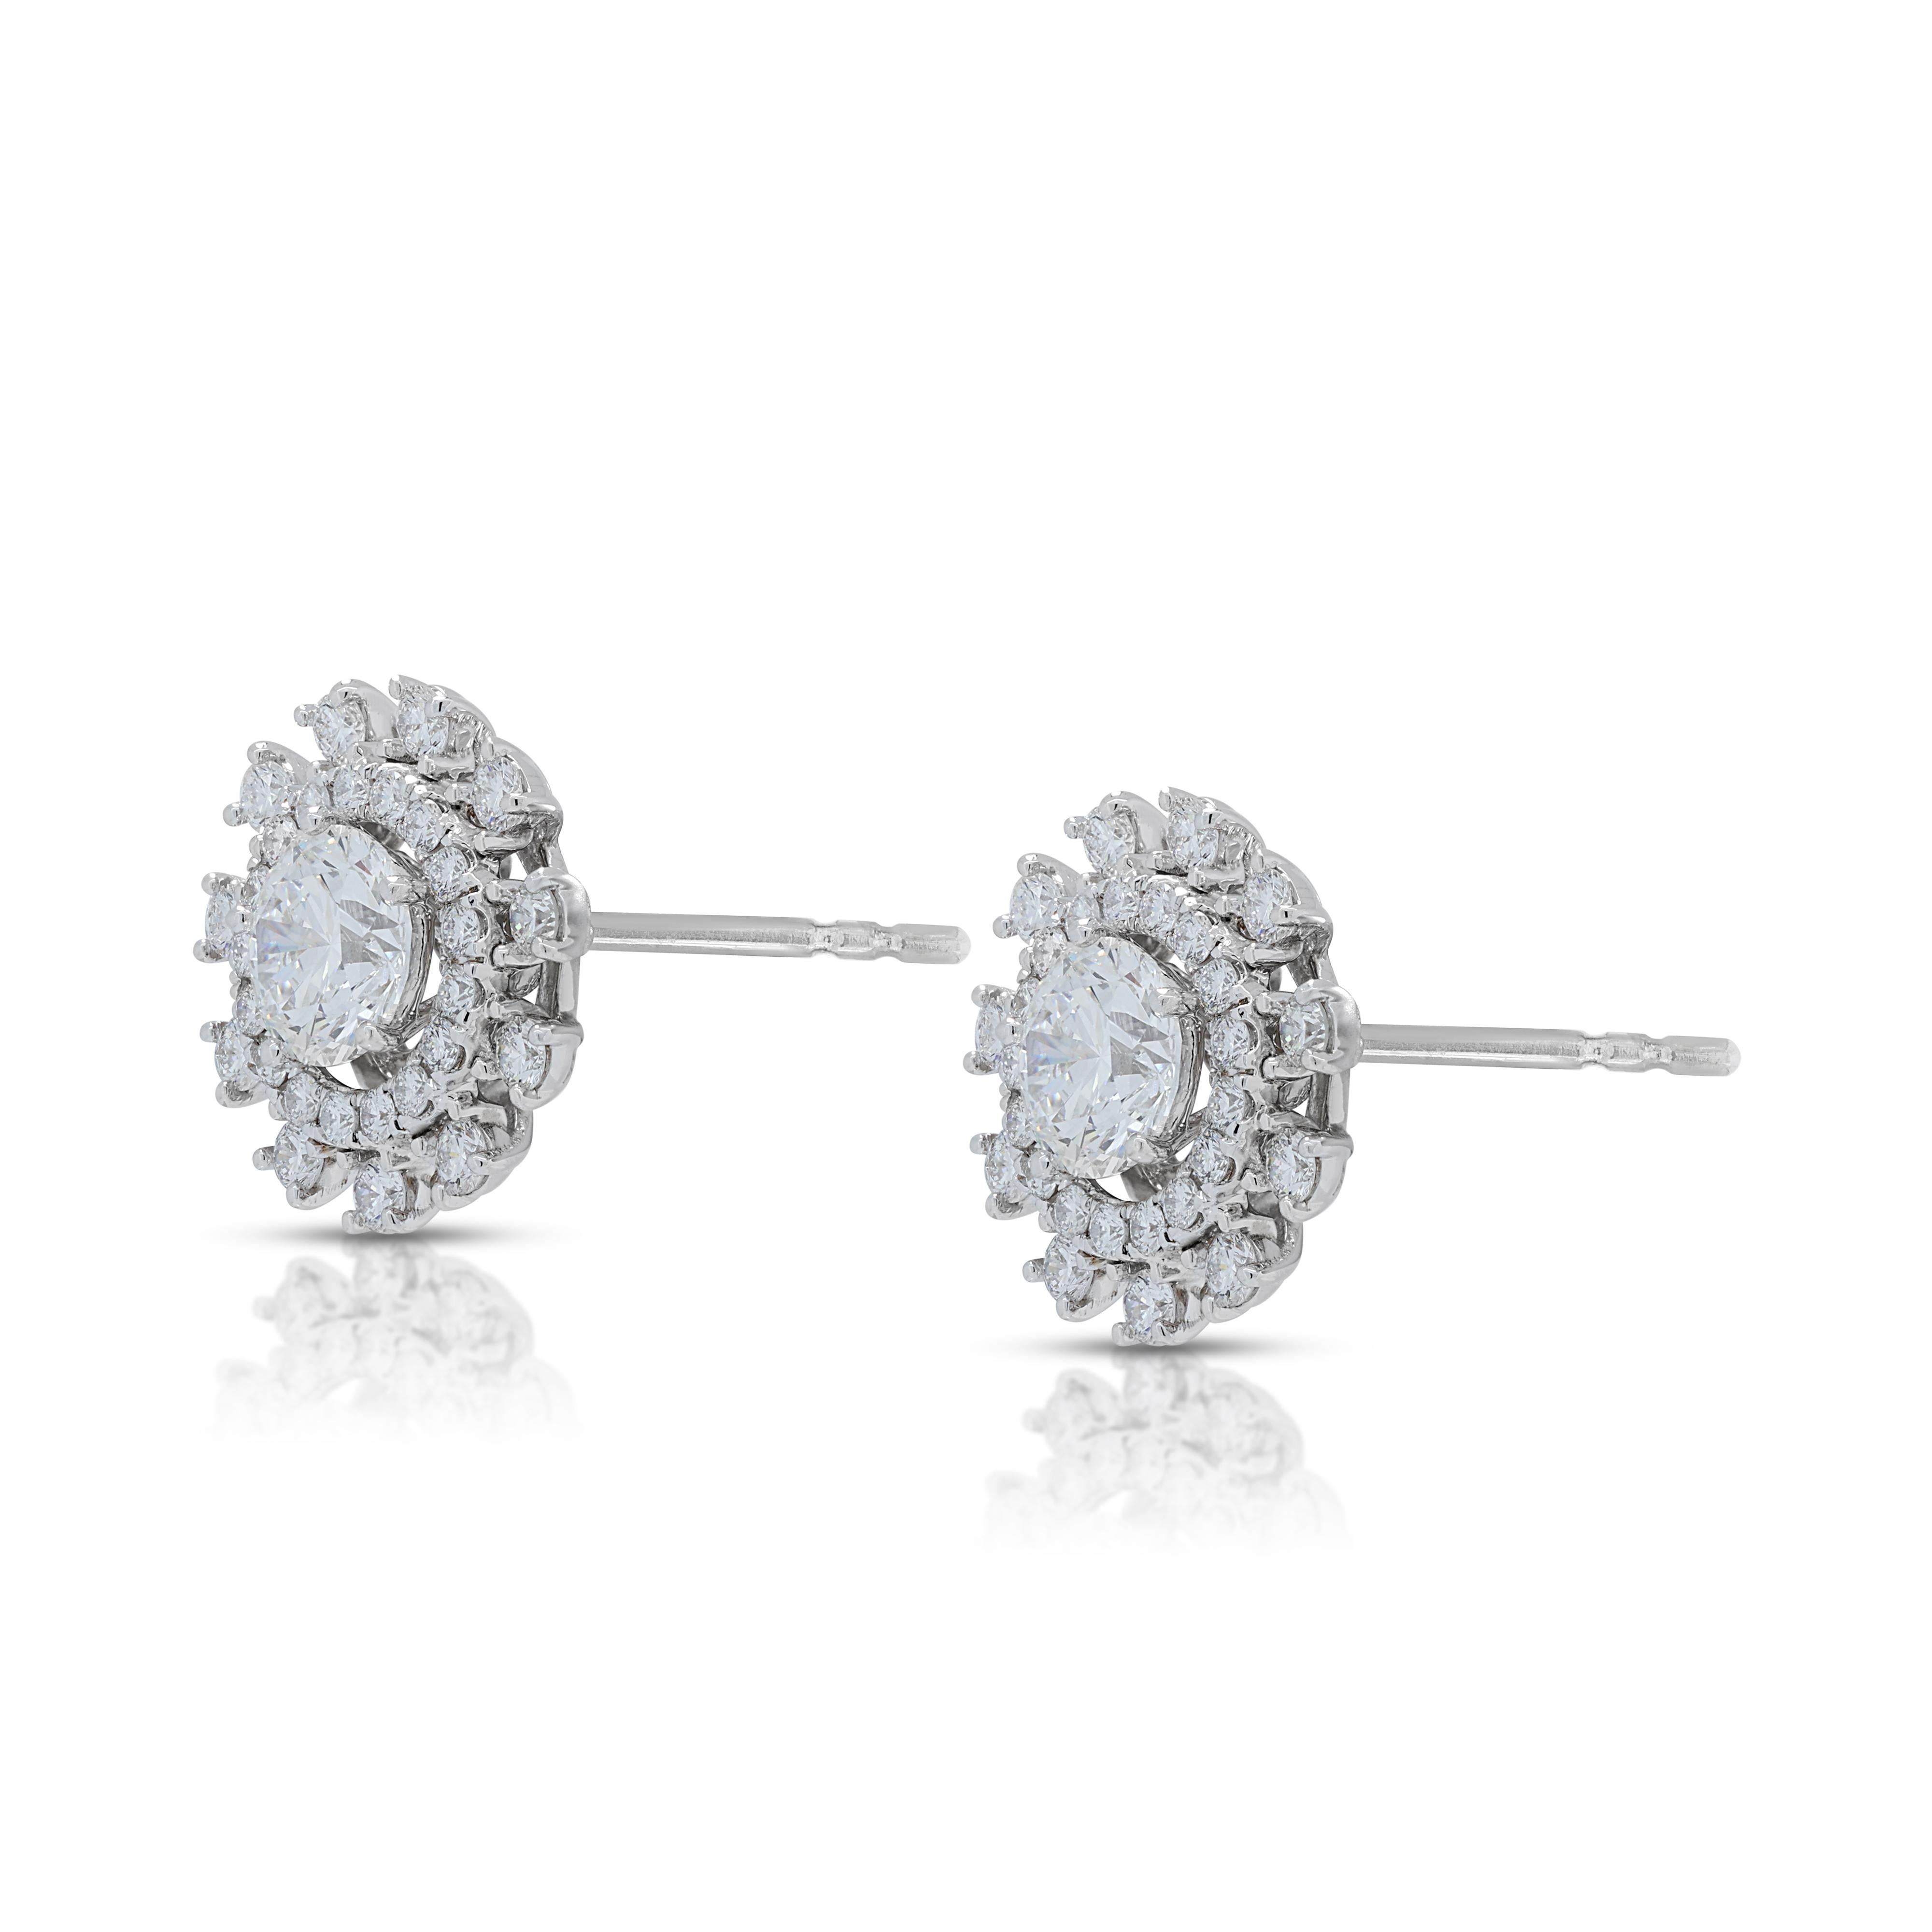 Luminous 2.22ct Diamond Halo Stud Earrings in 18K White Gold  In Excellent Condition For Sale In רמת גן, IL